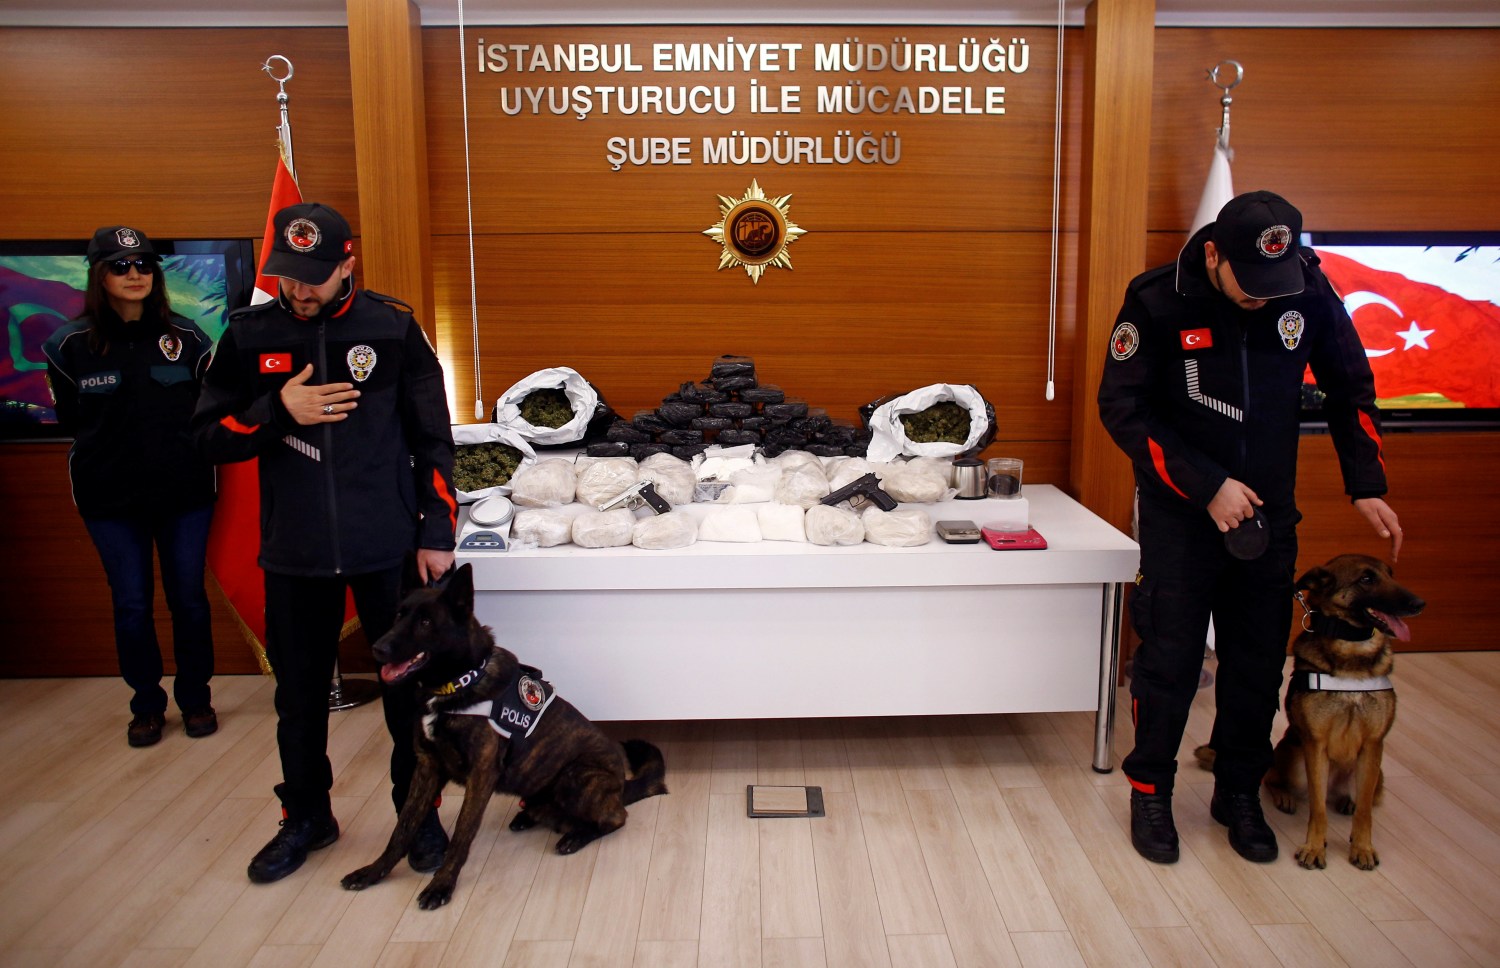 Turkish anti-drug police stand next to drugs and weapons, which according to Istanbul Police department are worth $3.6 million, that were seized during raids across Istanbul, Turkey March 27, 2017. REUTERS/Osman Orsal - RTX32WAY